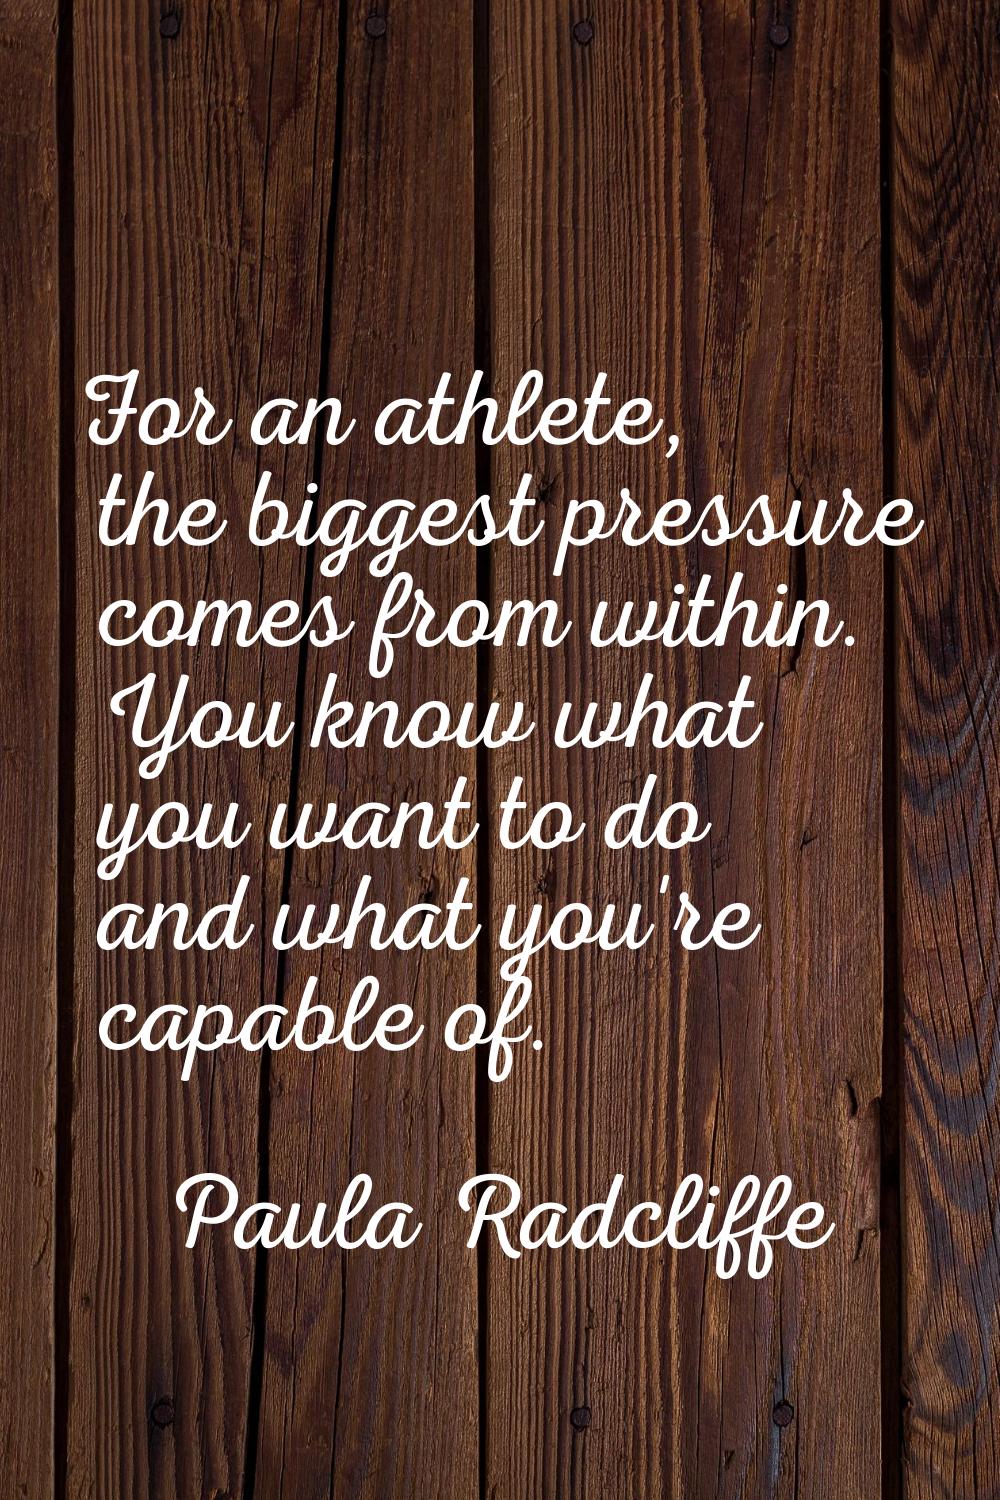 For an athlete, the biggest pressure comes from within. You know what you want to do and what you'r